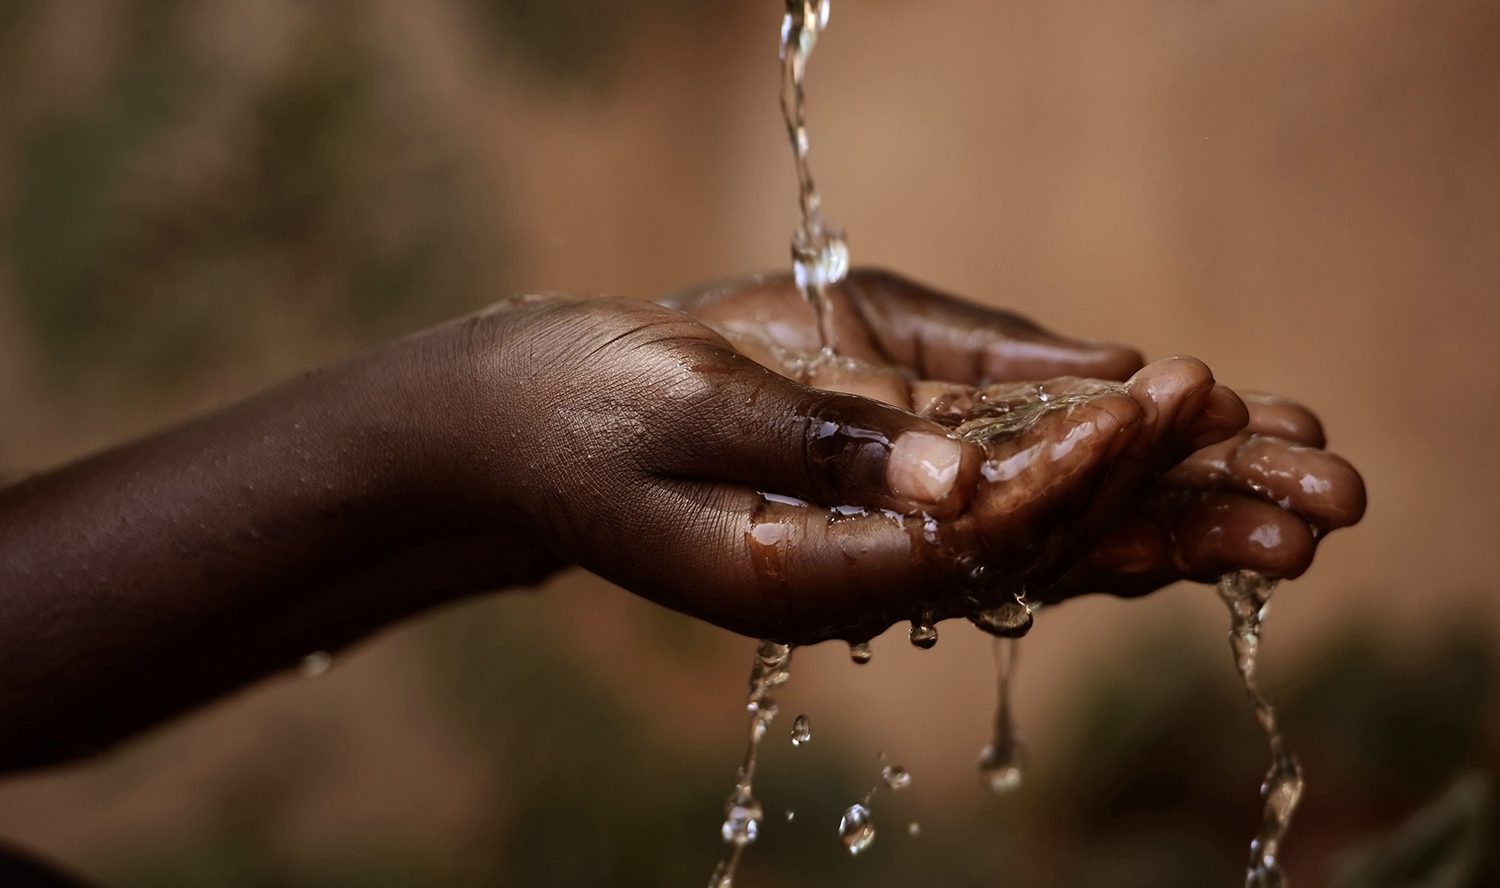 Hands of a young black person receiving water under a thin water stream